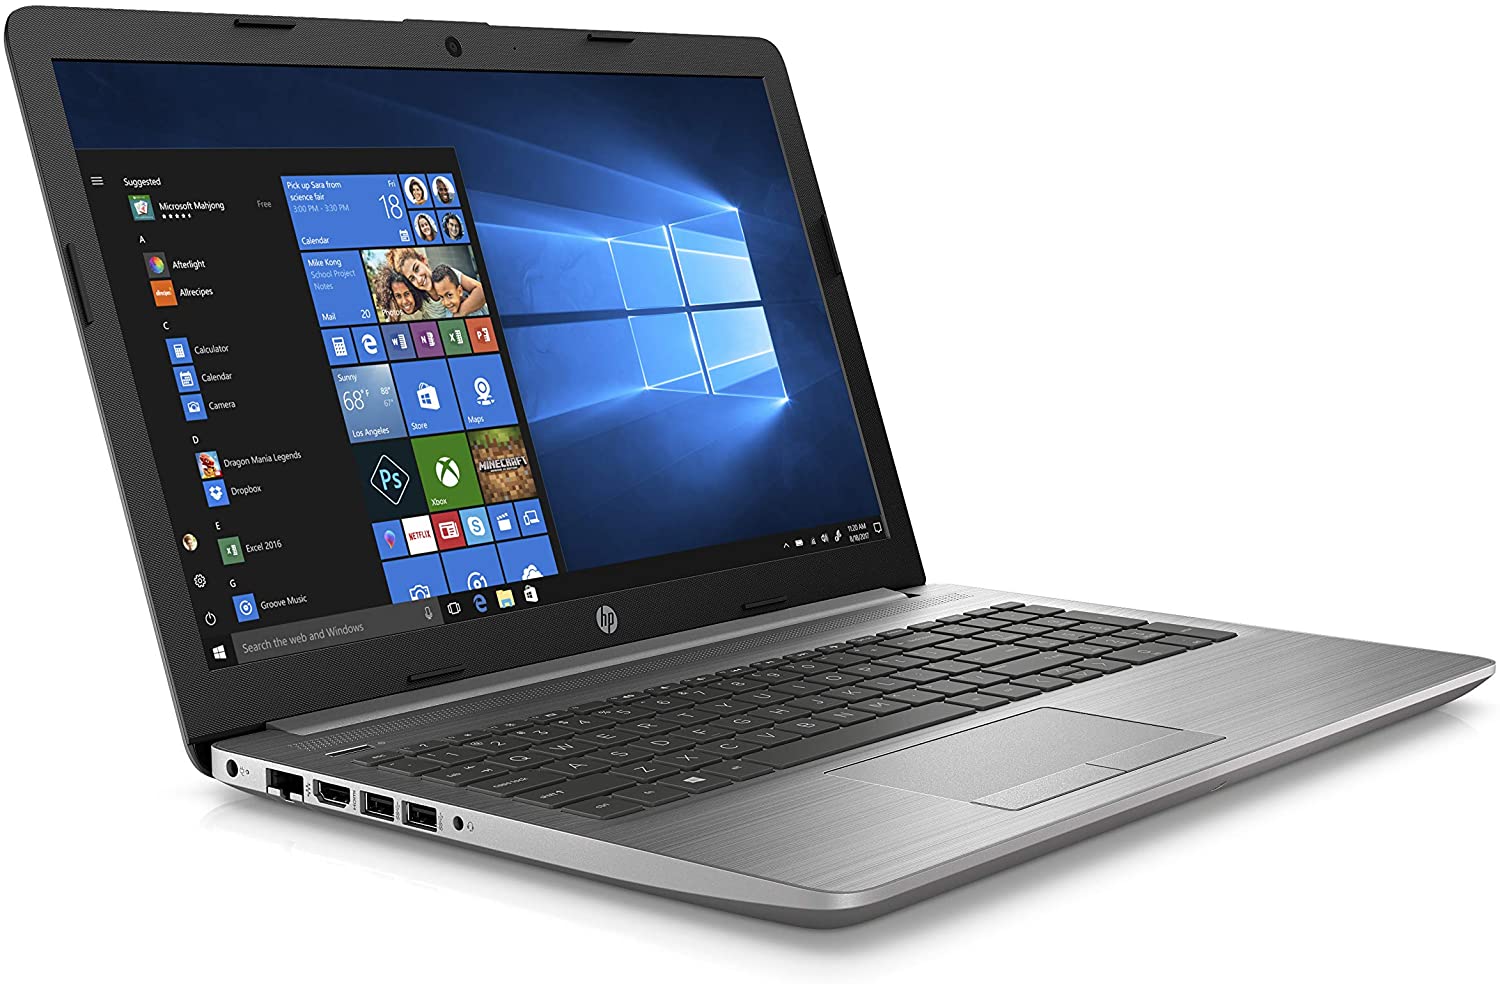 hp 250 g7 15.6-inch fhd business laptop